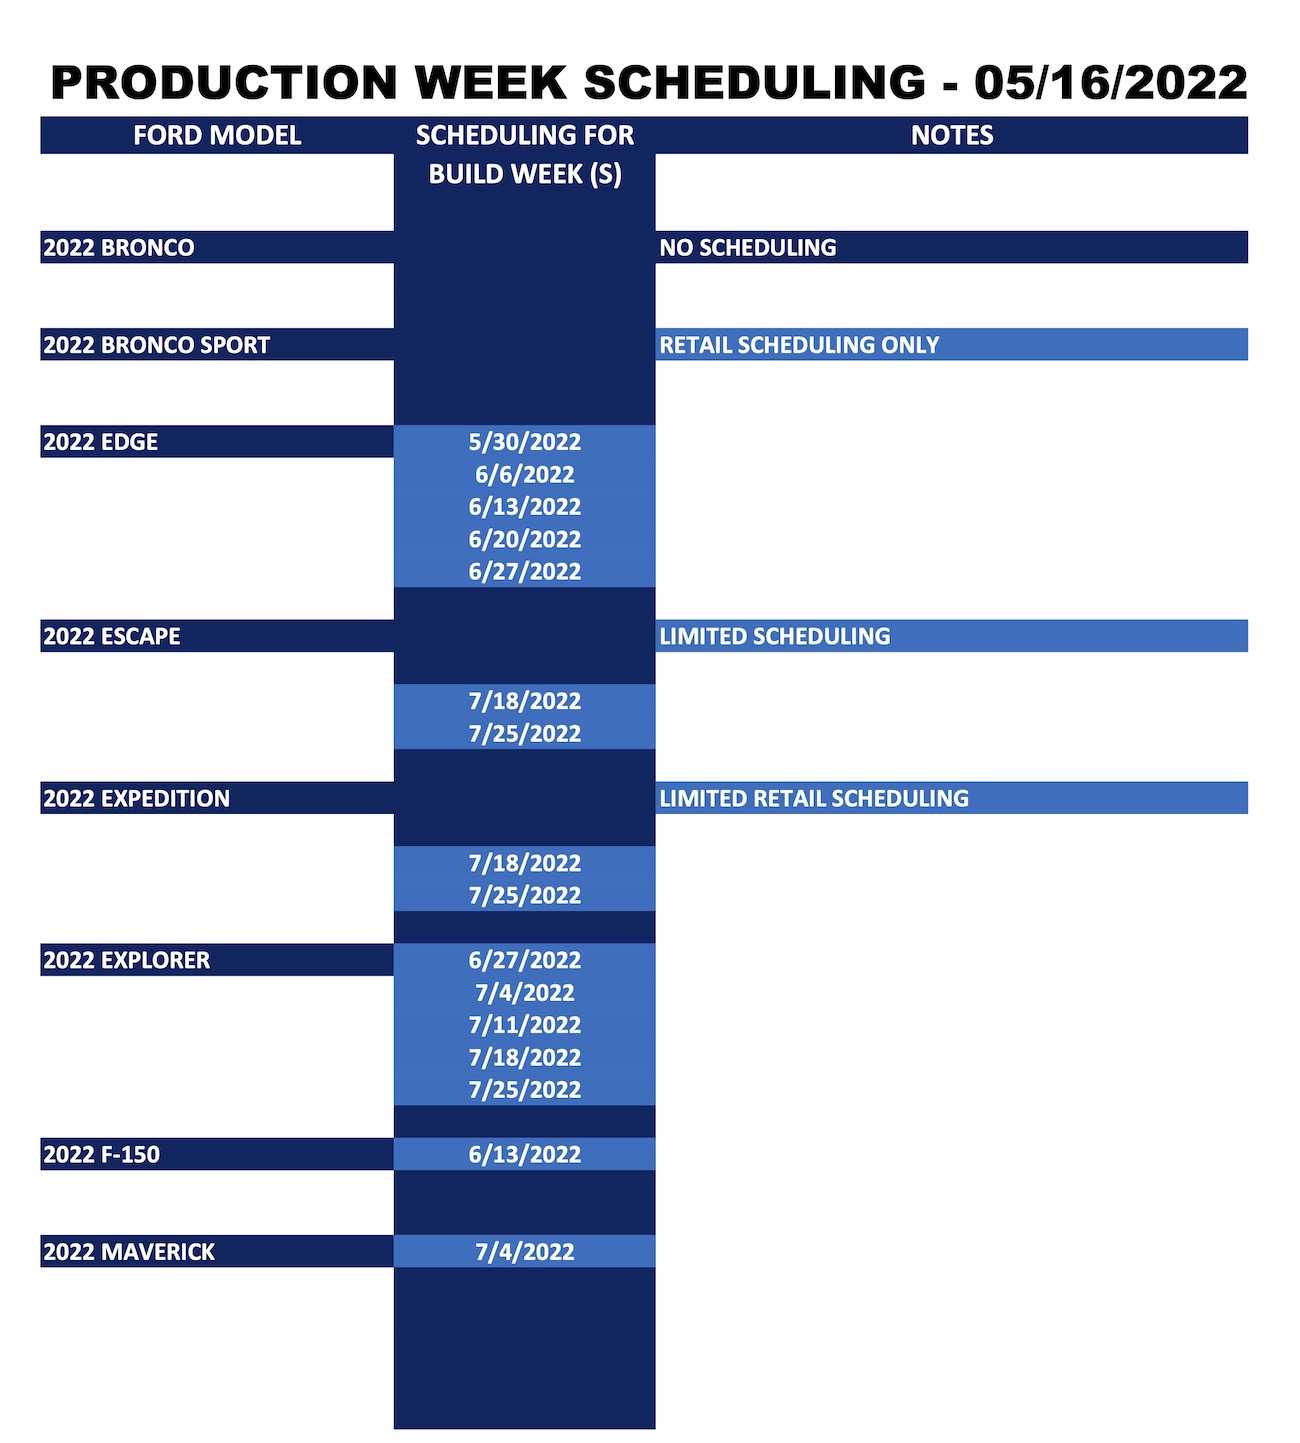 Ford_Production Week Scheduling_2022-05-16_1.jpg